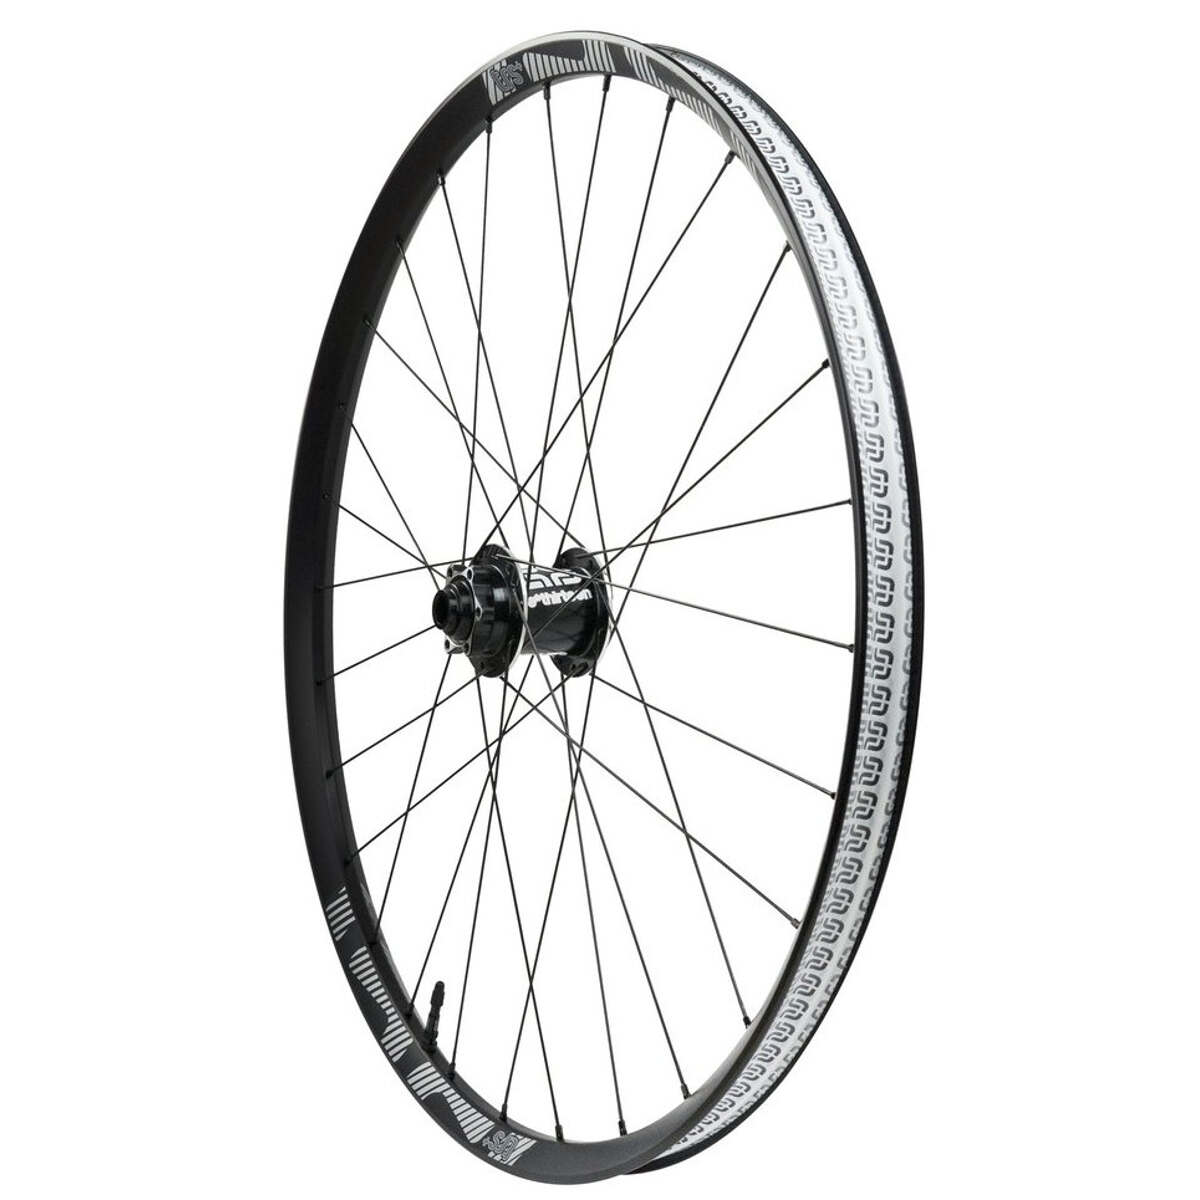 E*thirteen Wheel TRS+ Front, 29 Inches, 100 x 15 mm, 30 mm